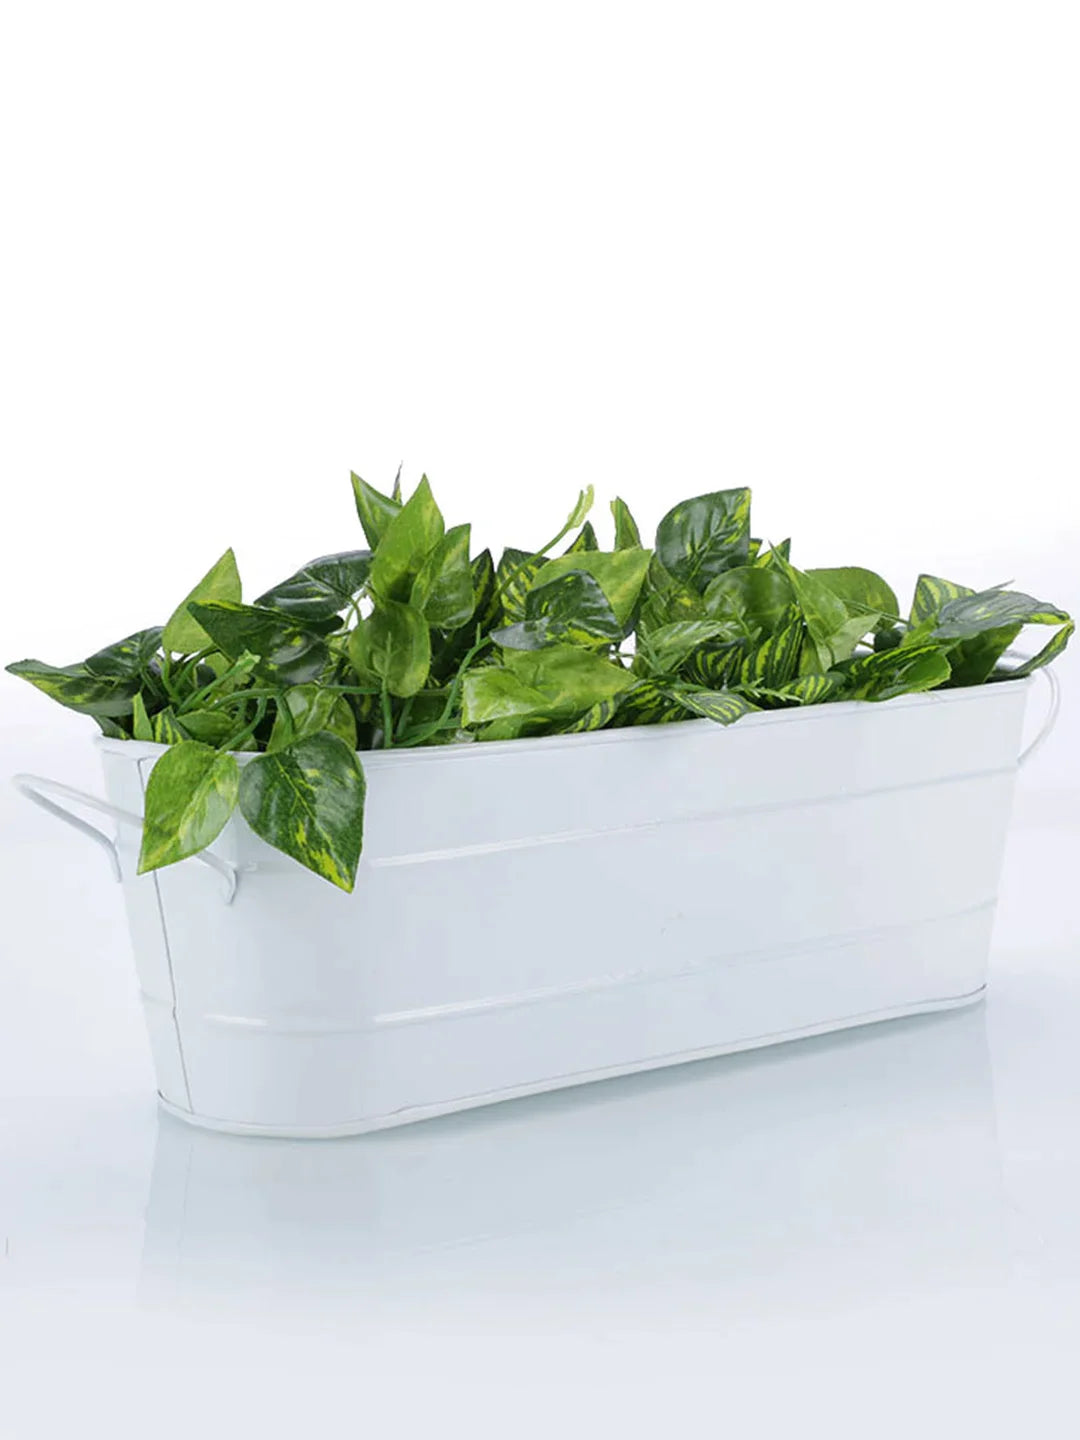 Oval Planter Large White 16 Inches